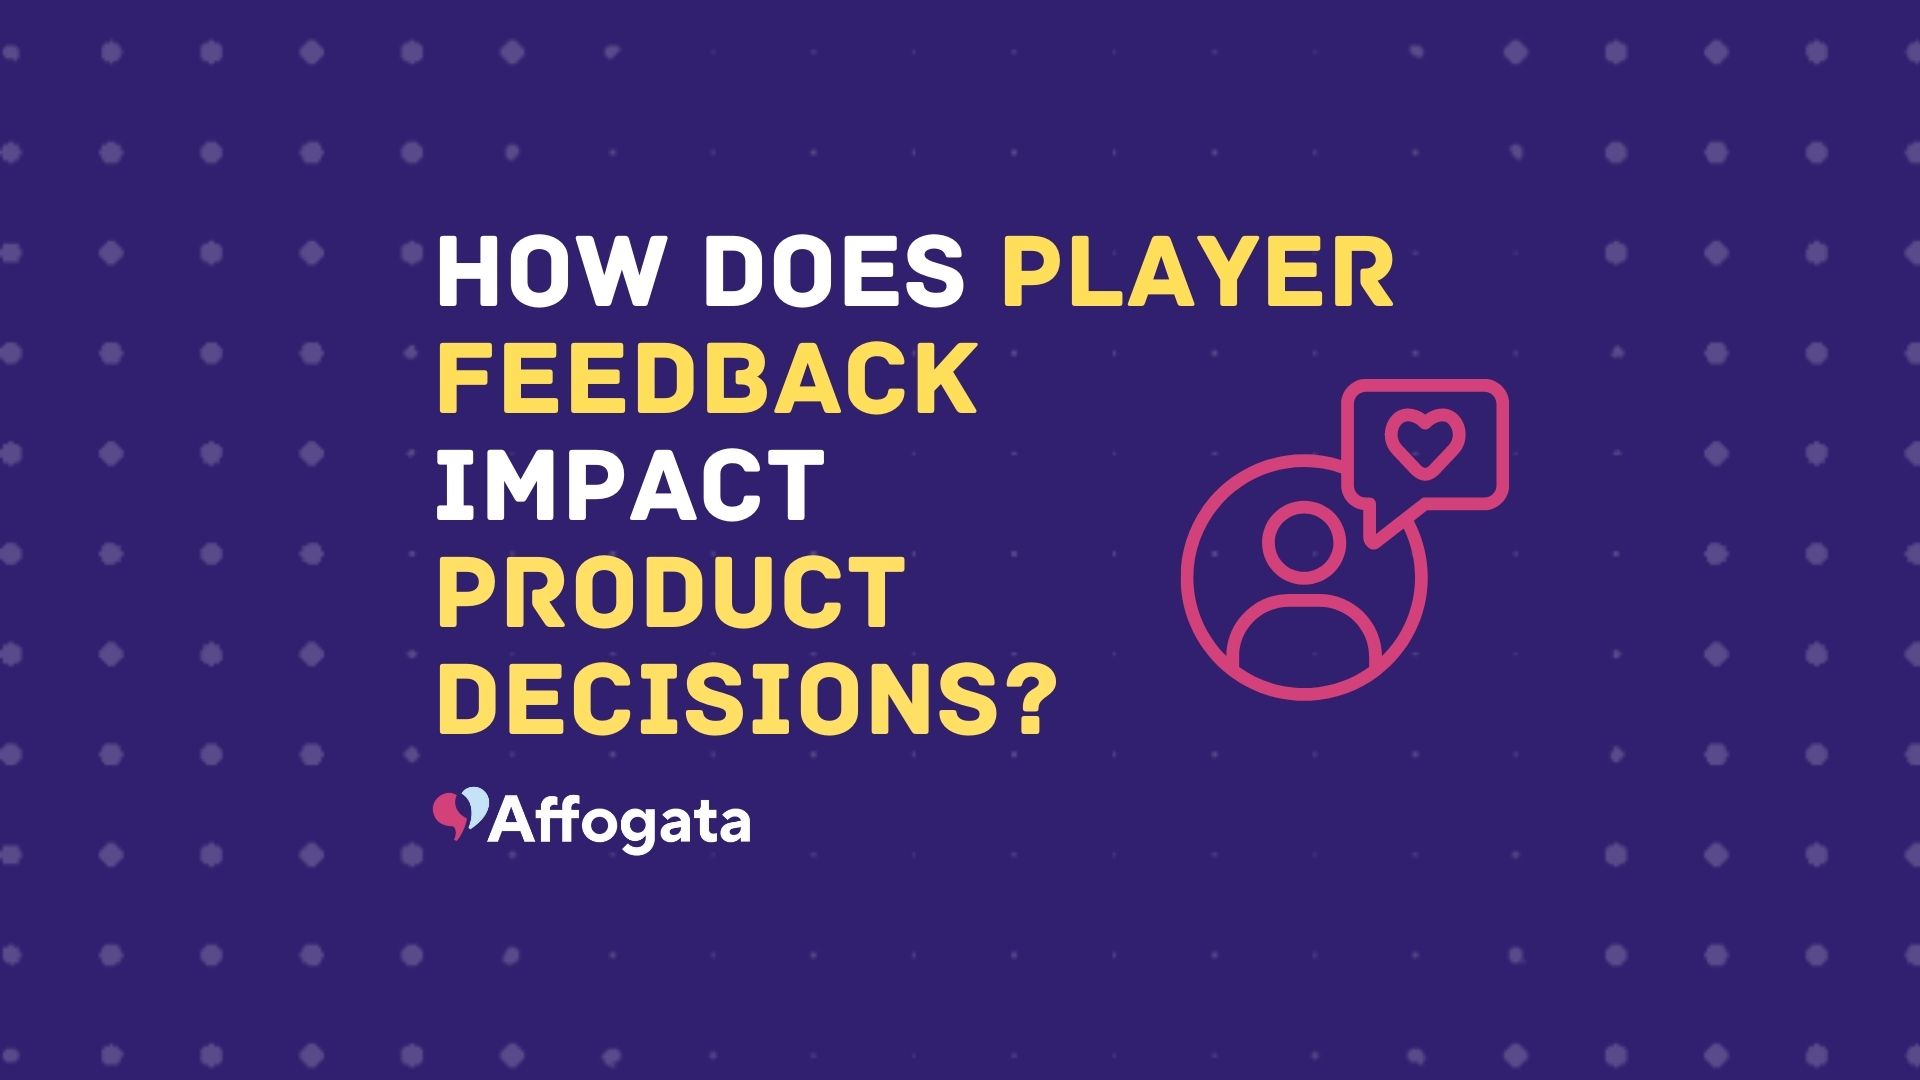 How does player feedback impact product decisions?